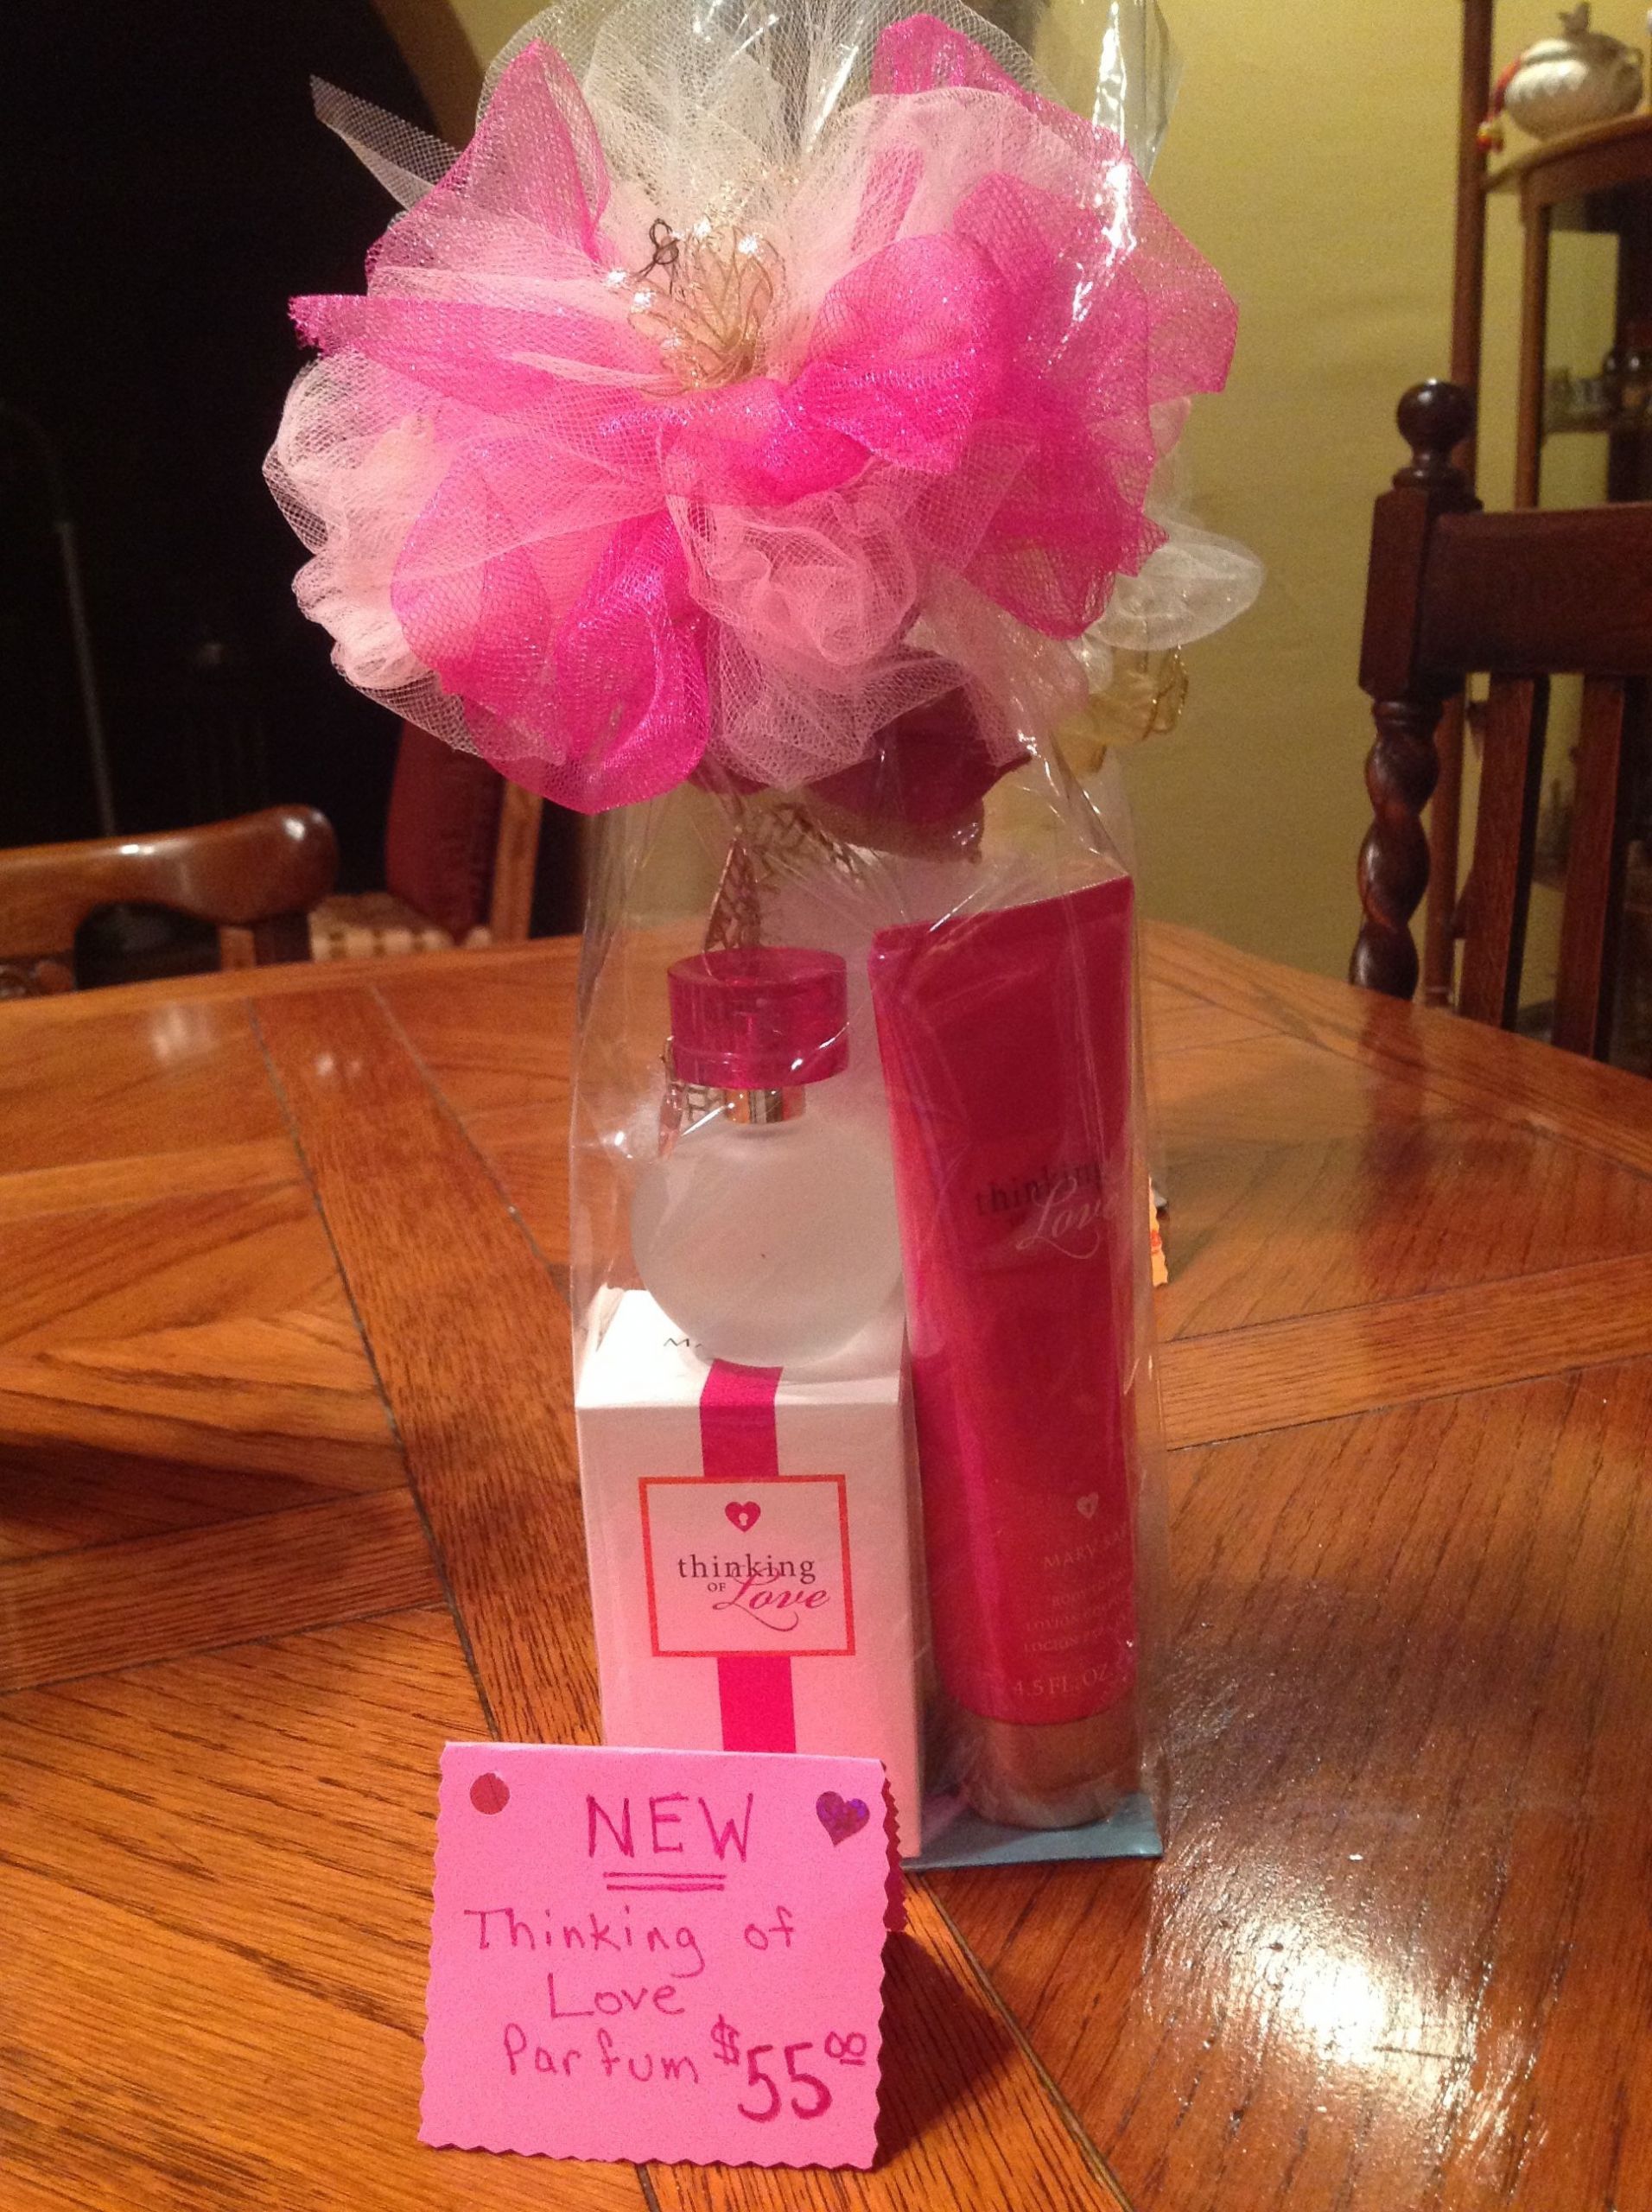 Mary Kay Valentine Gift Ideas
 NEW Thinking of Love Eau de parfum and body lotion $55